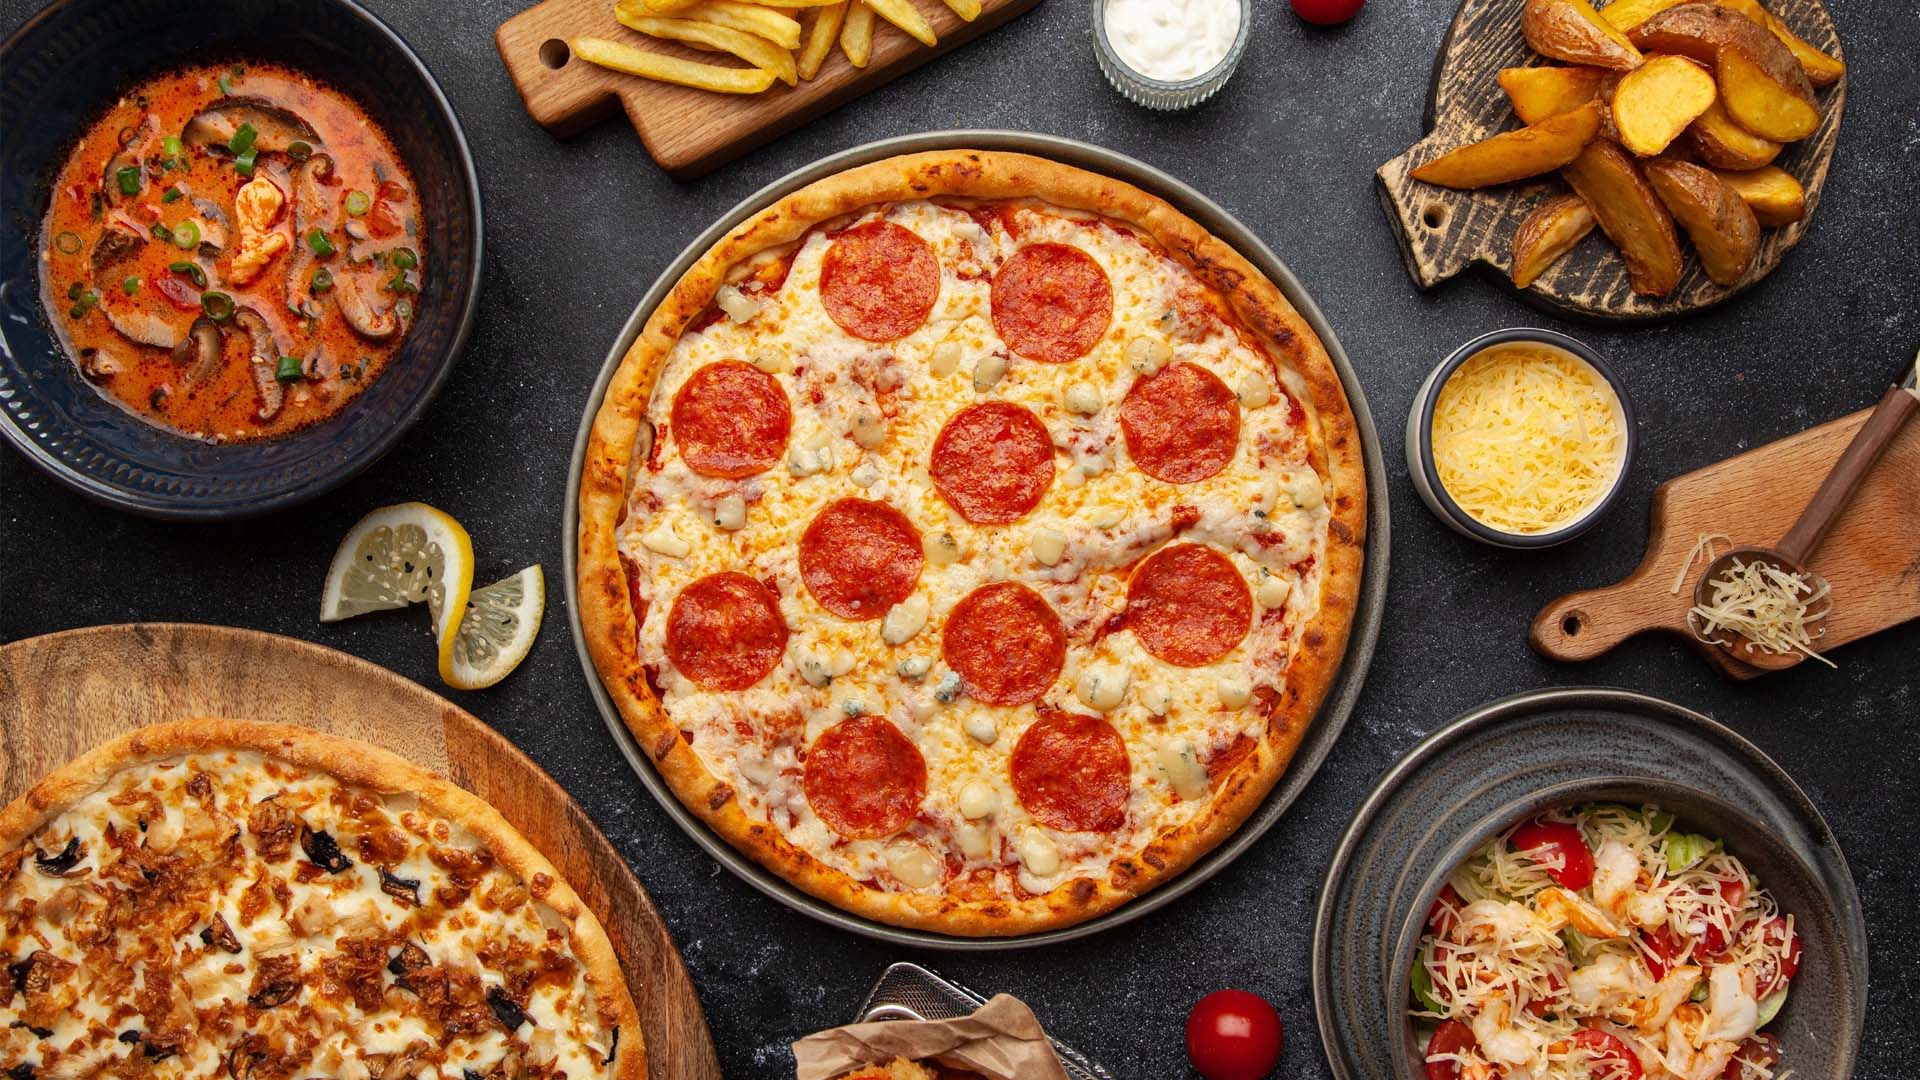 Pepperoni pizza and Italian food at the best pizza places in Singapore